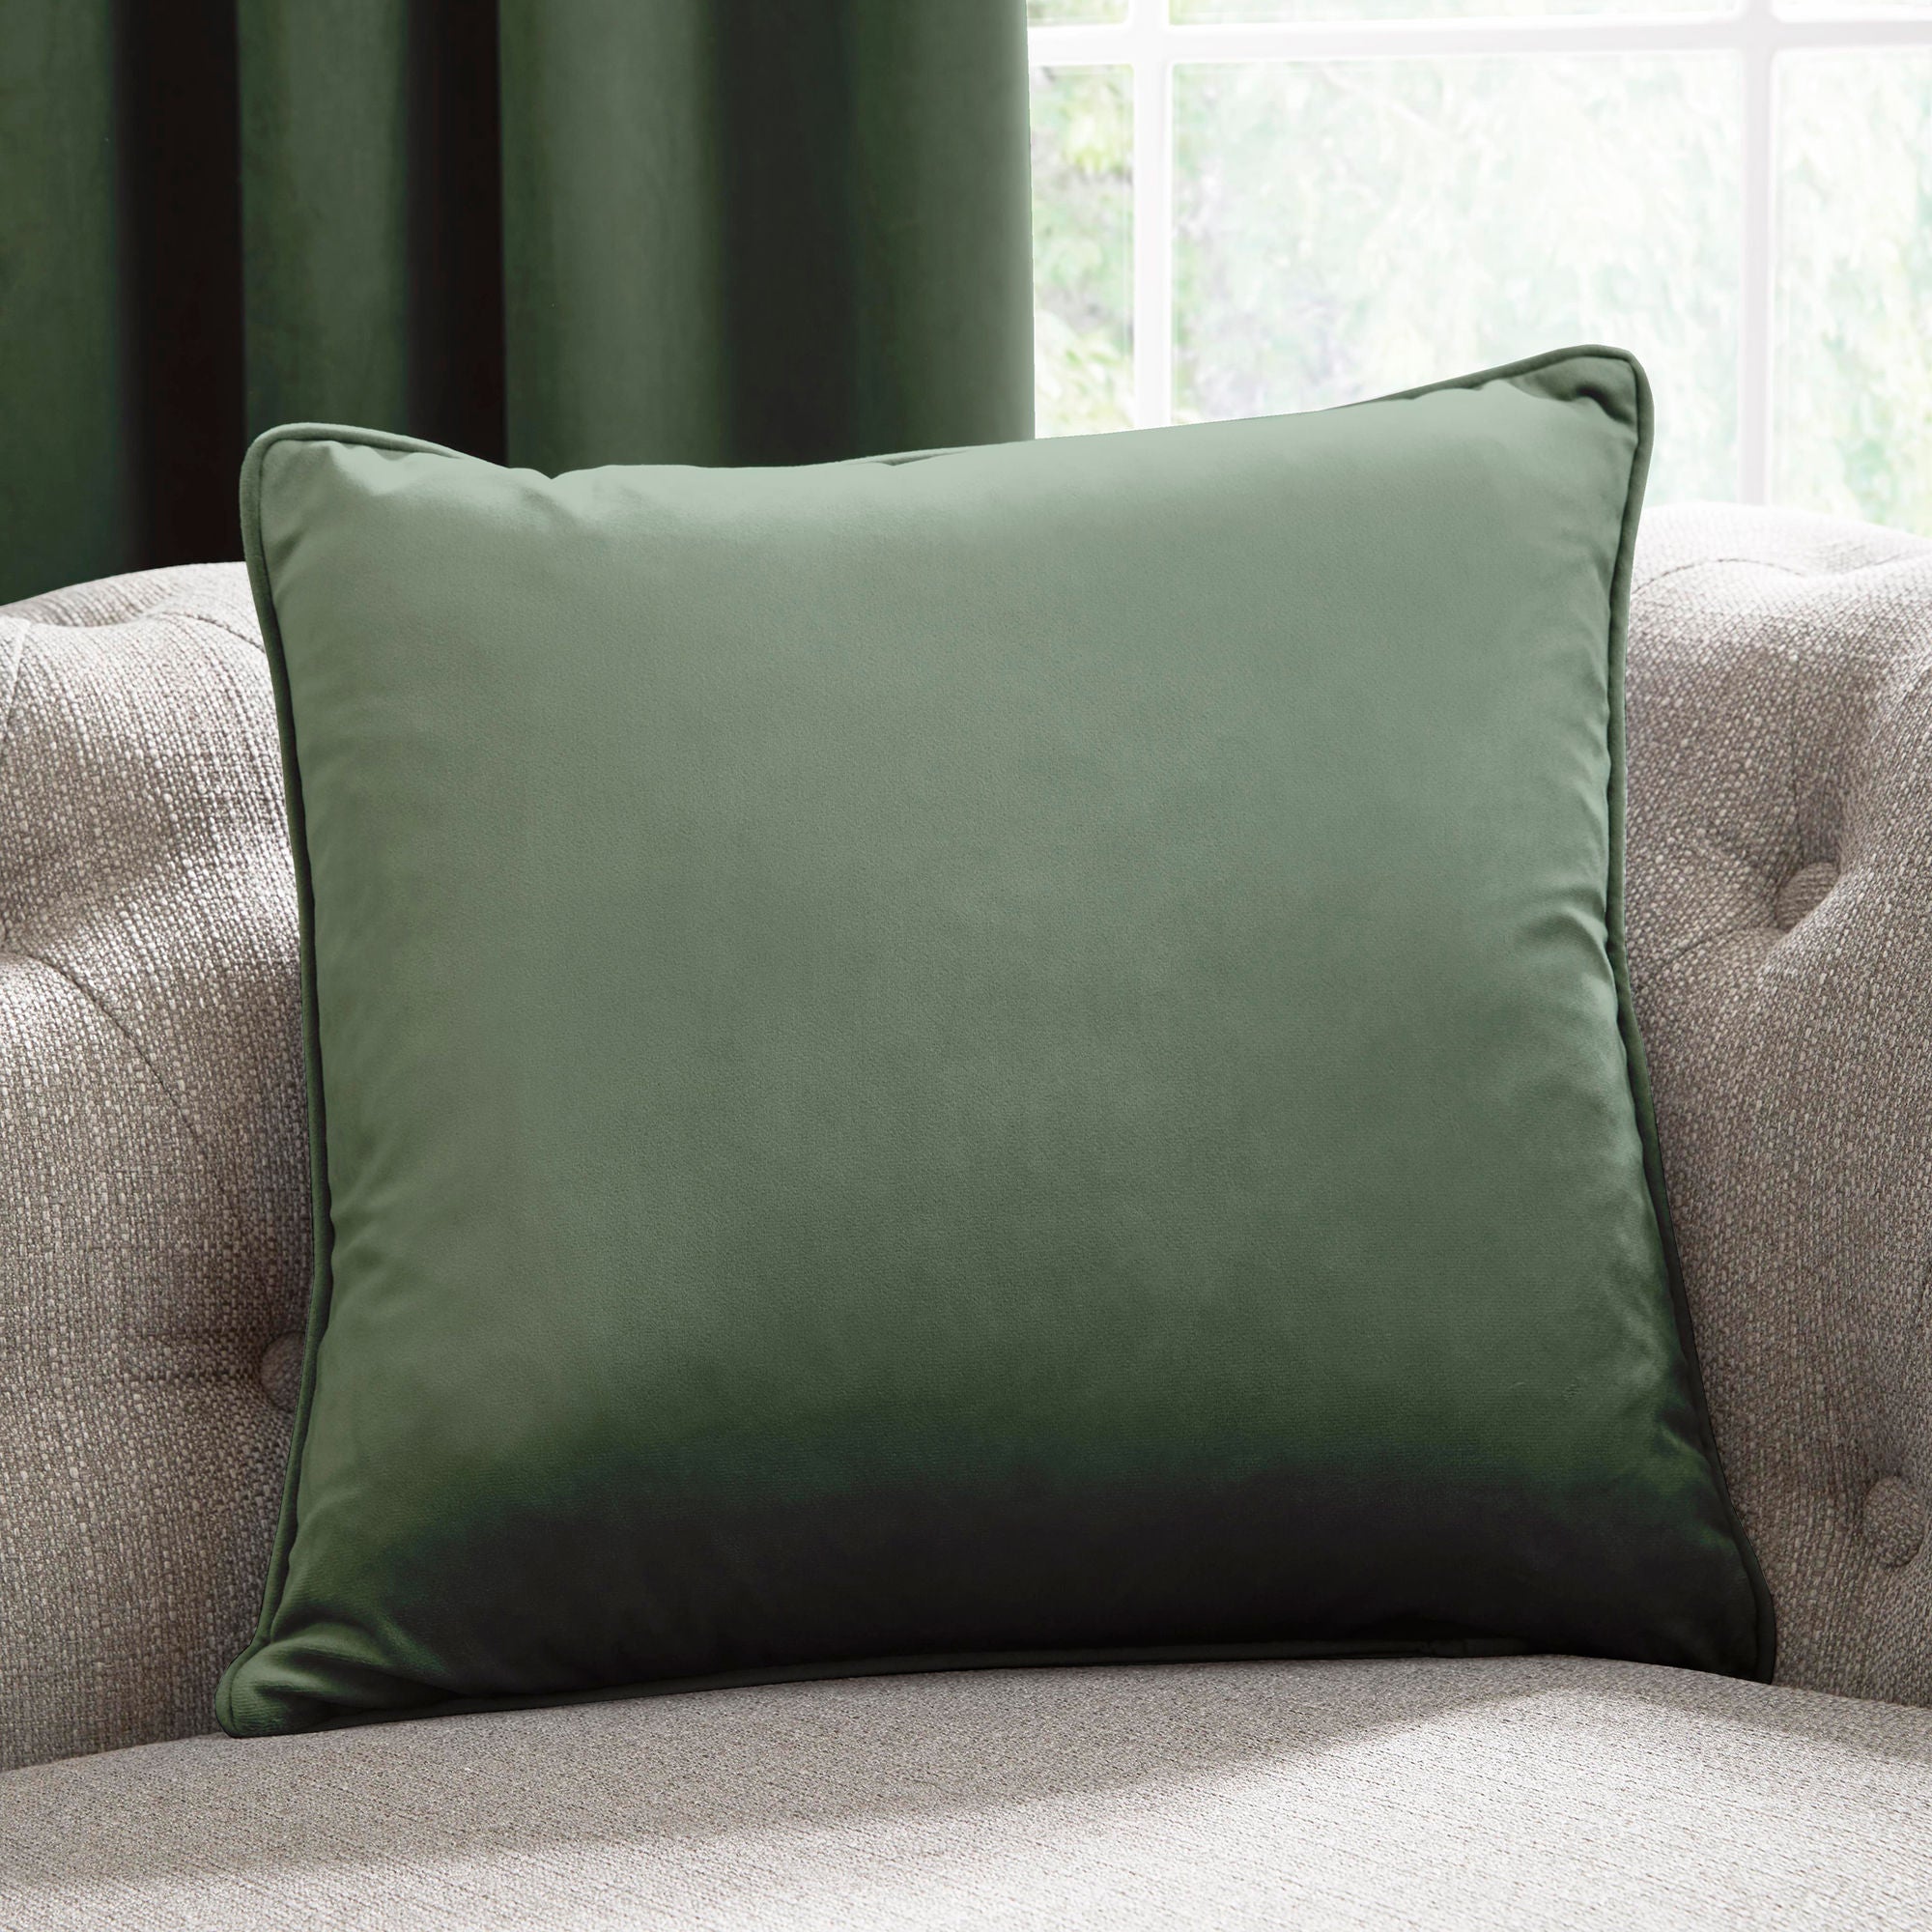 Montrose Cushion by Laurence Llewelyn-Bowen in Bottle Green 43 x 43cm - Cushion - Laurence Llewelyn-Bowen